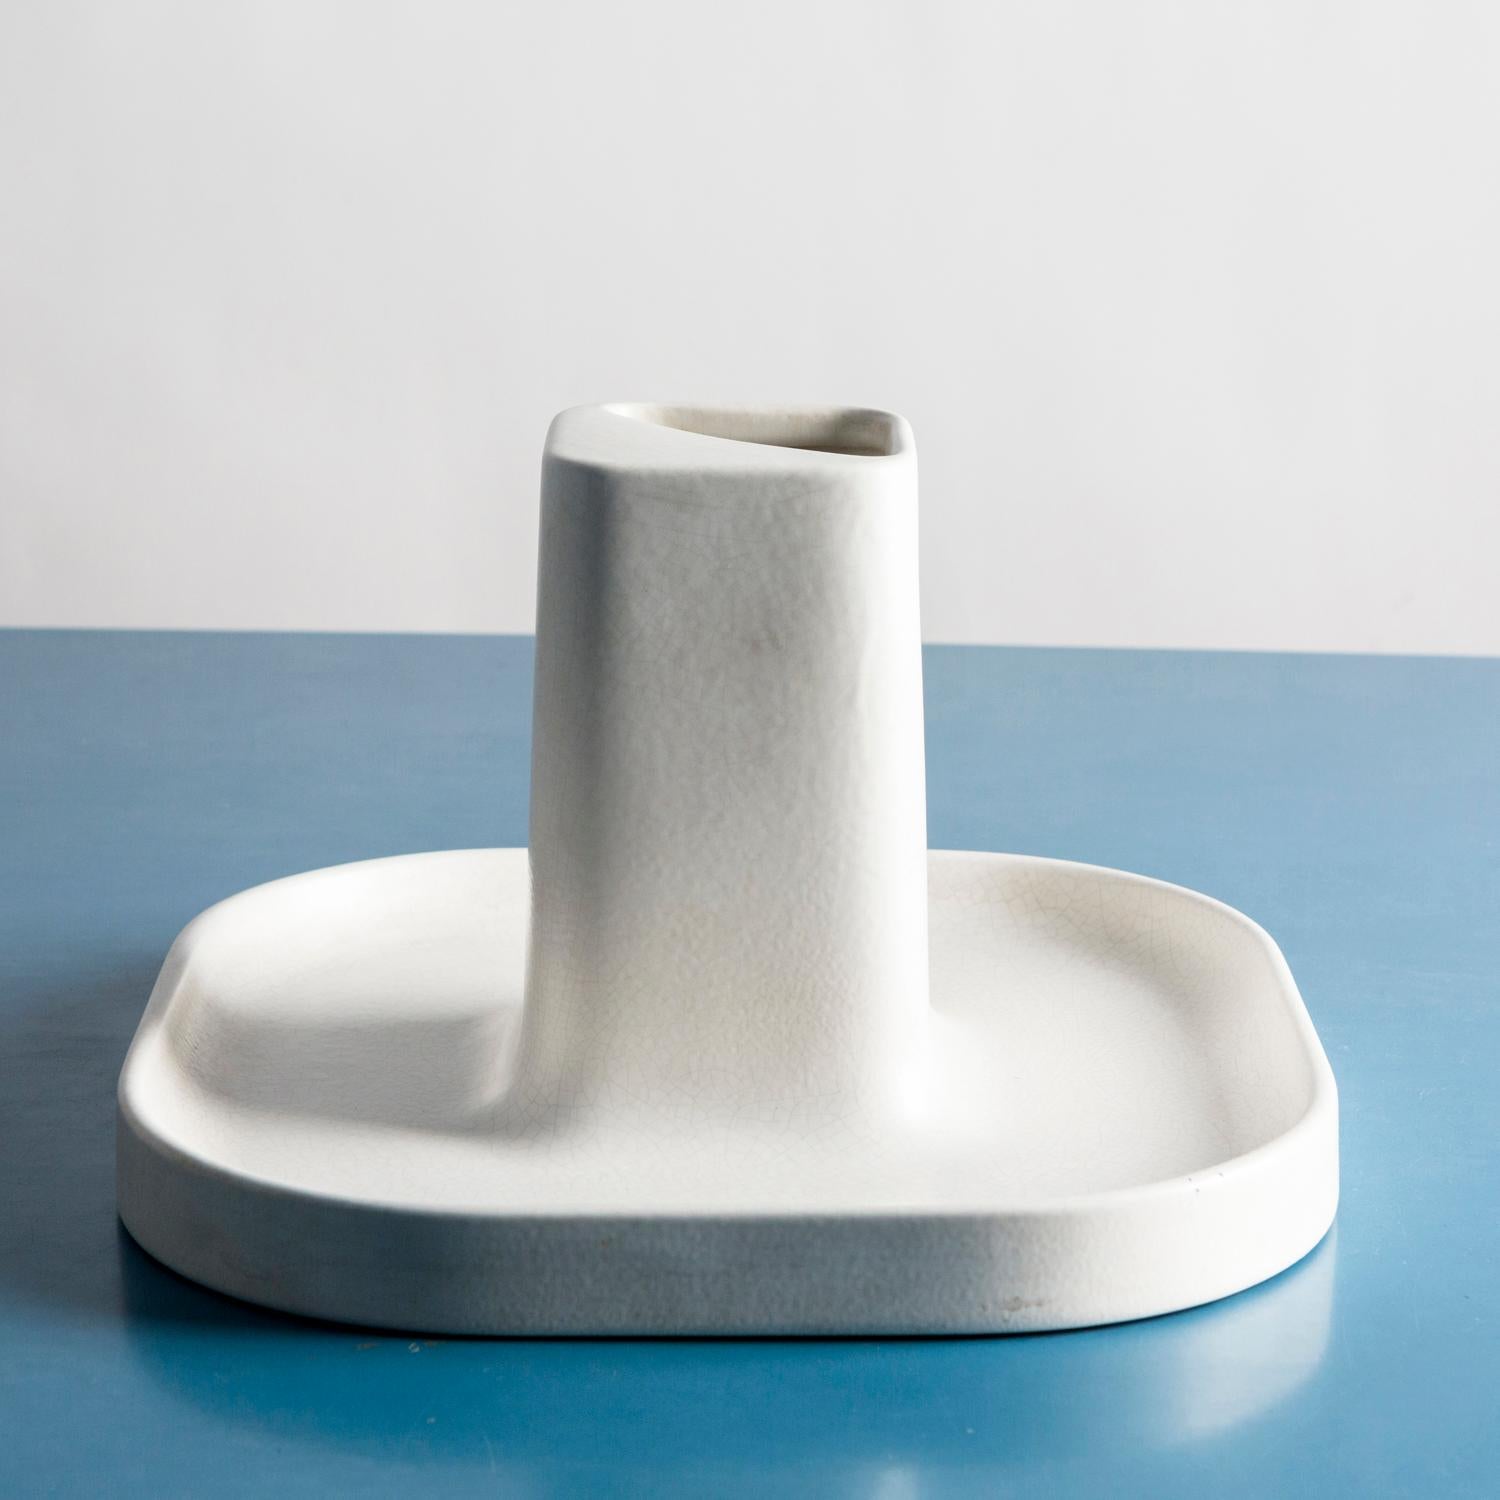 Sculptural white earthenware vase designed in the 1970s by Makio Hasuike for Arnolfo di Cambio.